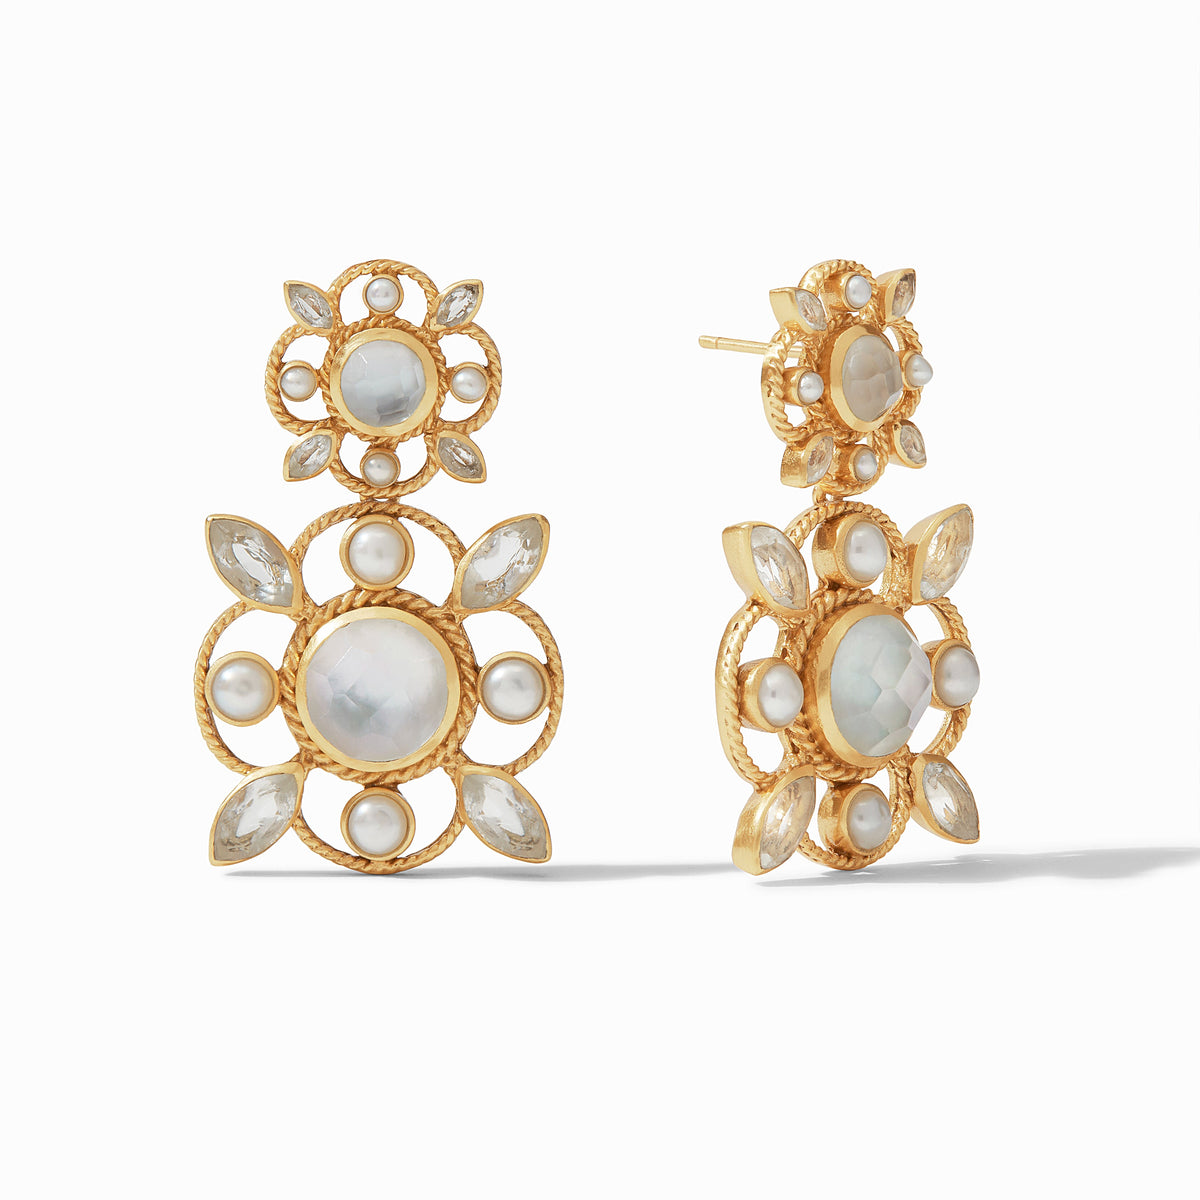 Julie Vos - Monaco Statement Earring, Iridescent Clear Crystal